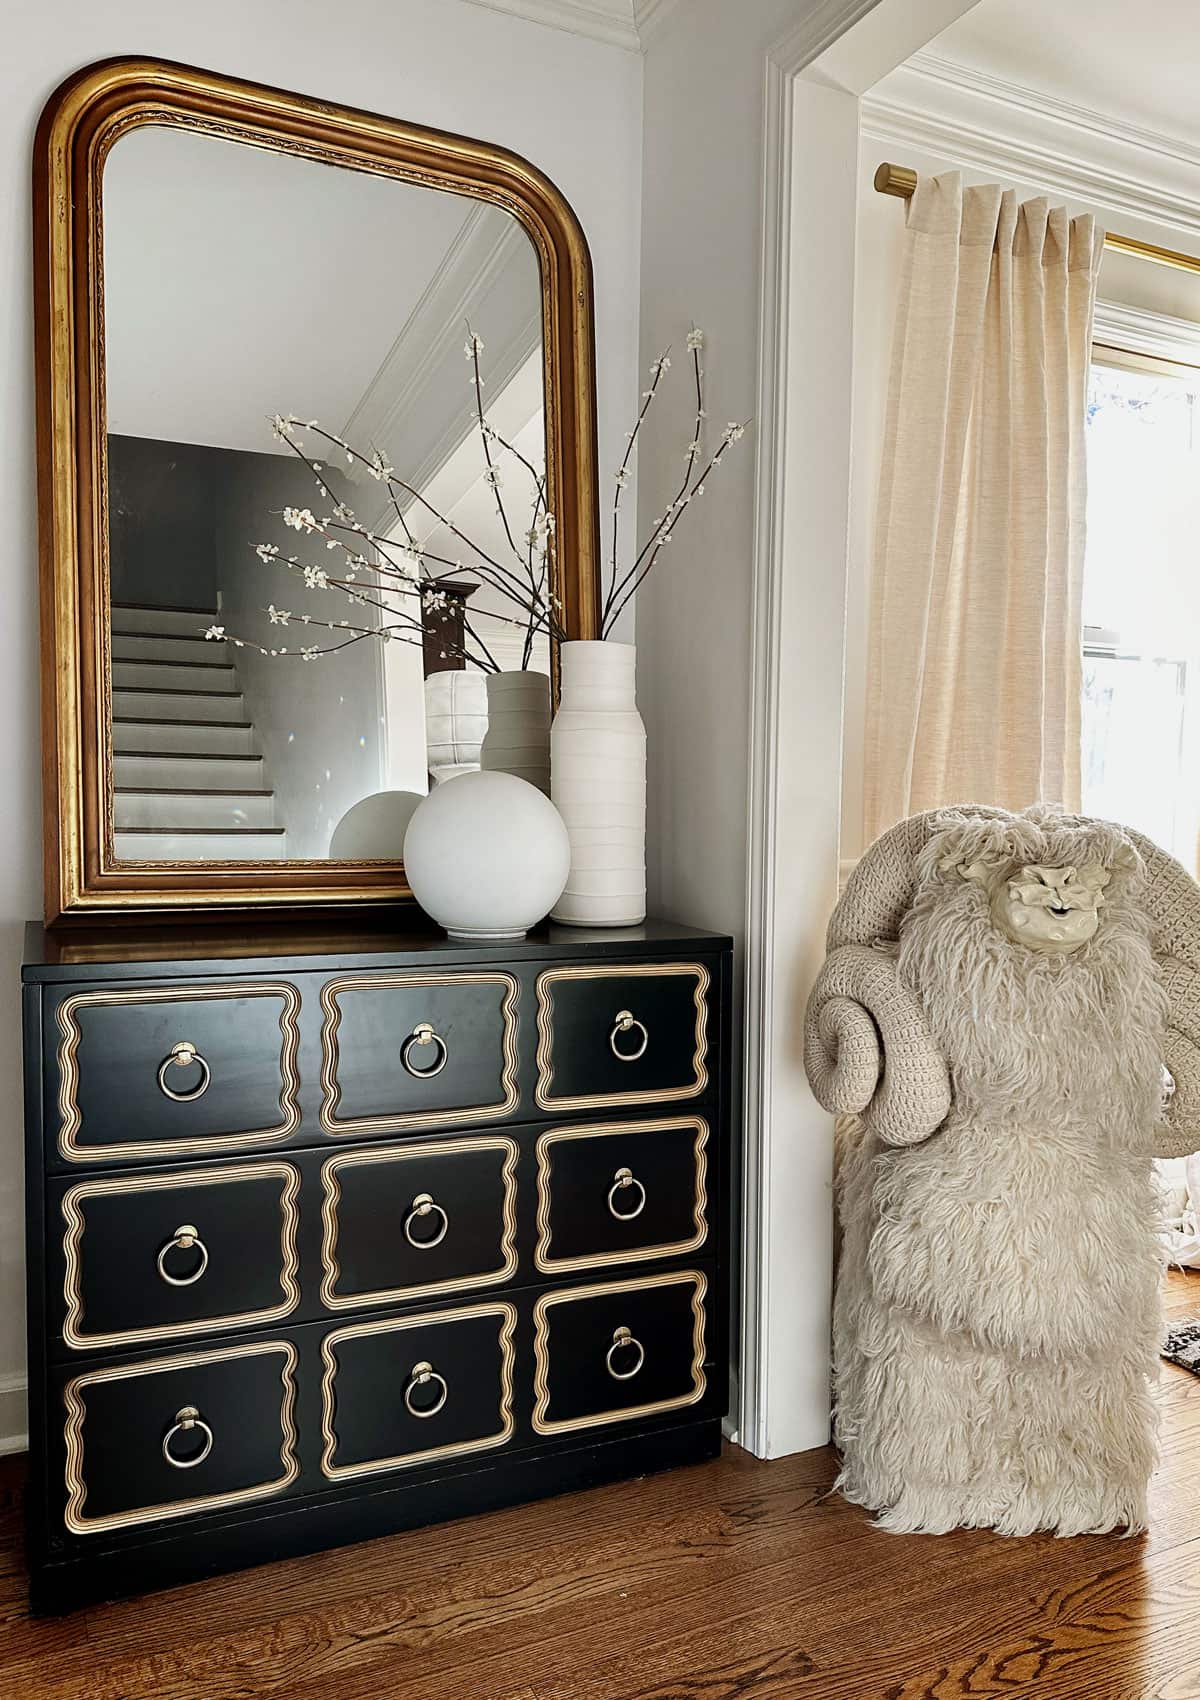 Seven tips from HGTV on how to shop for a dresser